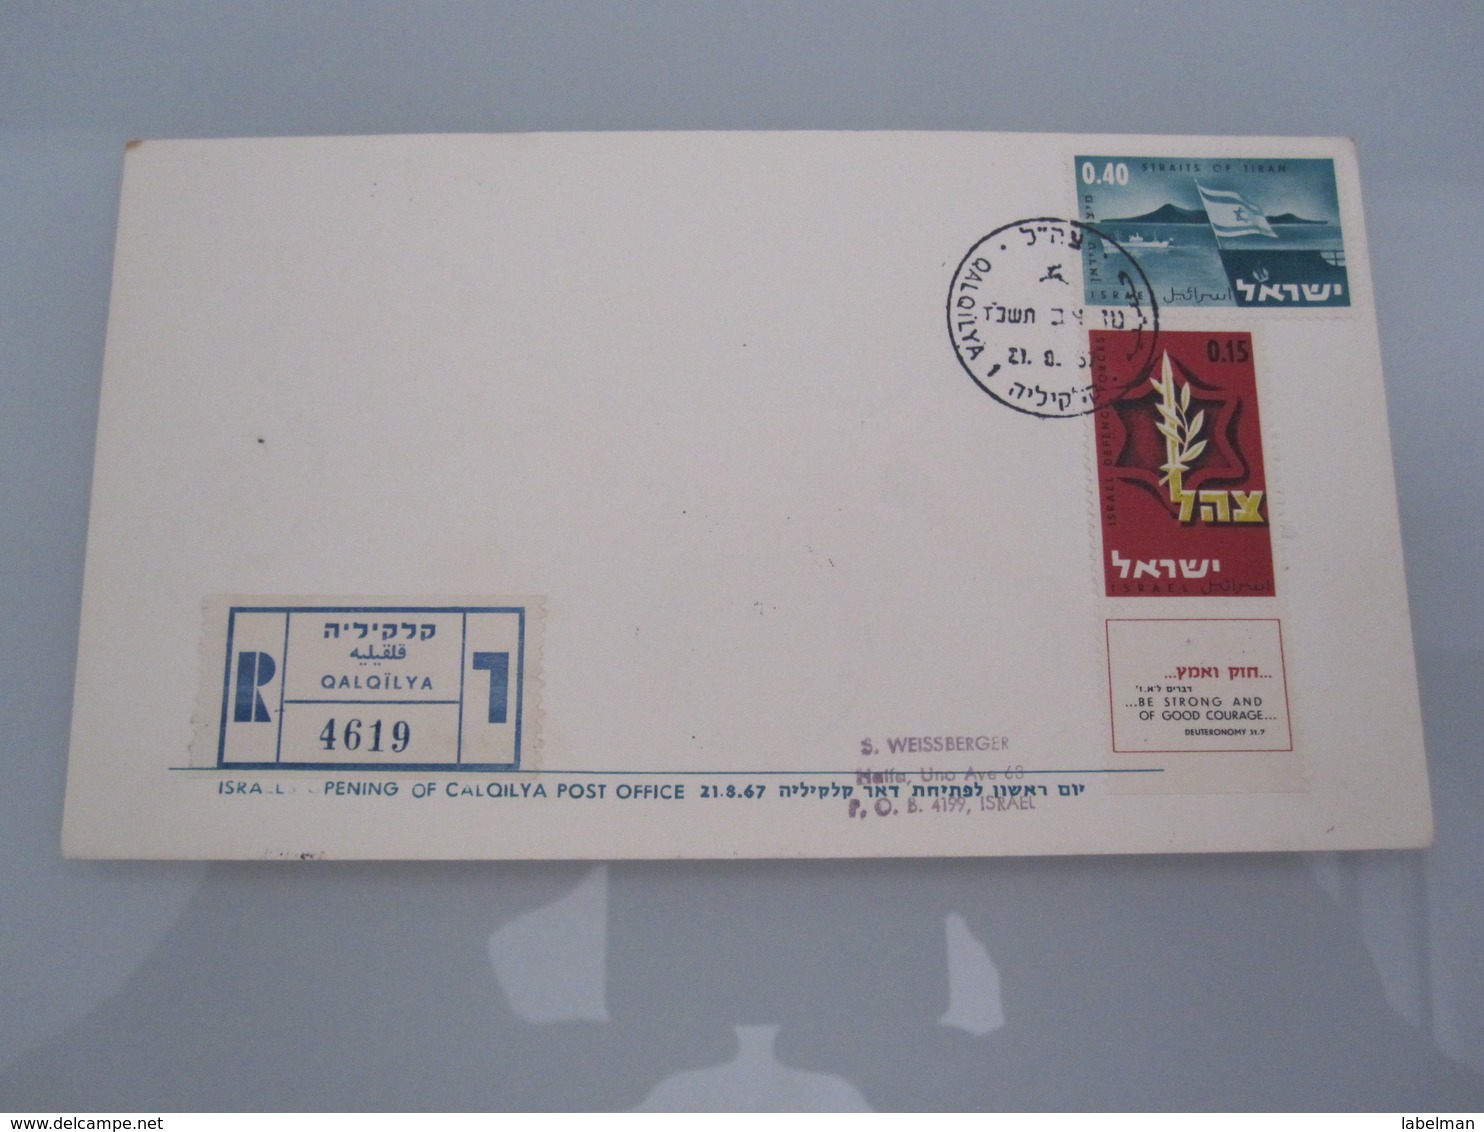 1967 POO FIRST DAY POST OFFICE OPENING MILITARY GOVERNMENT QALQILYA JORDAN 6 DAYS WAR COVER ISRAEL CACHET - Covers & Documents